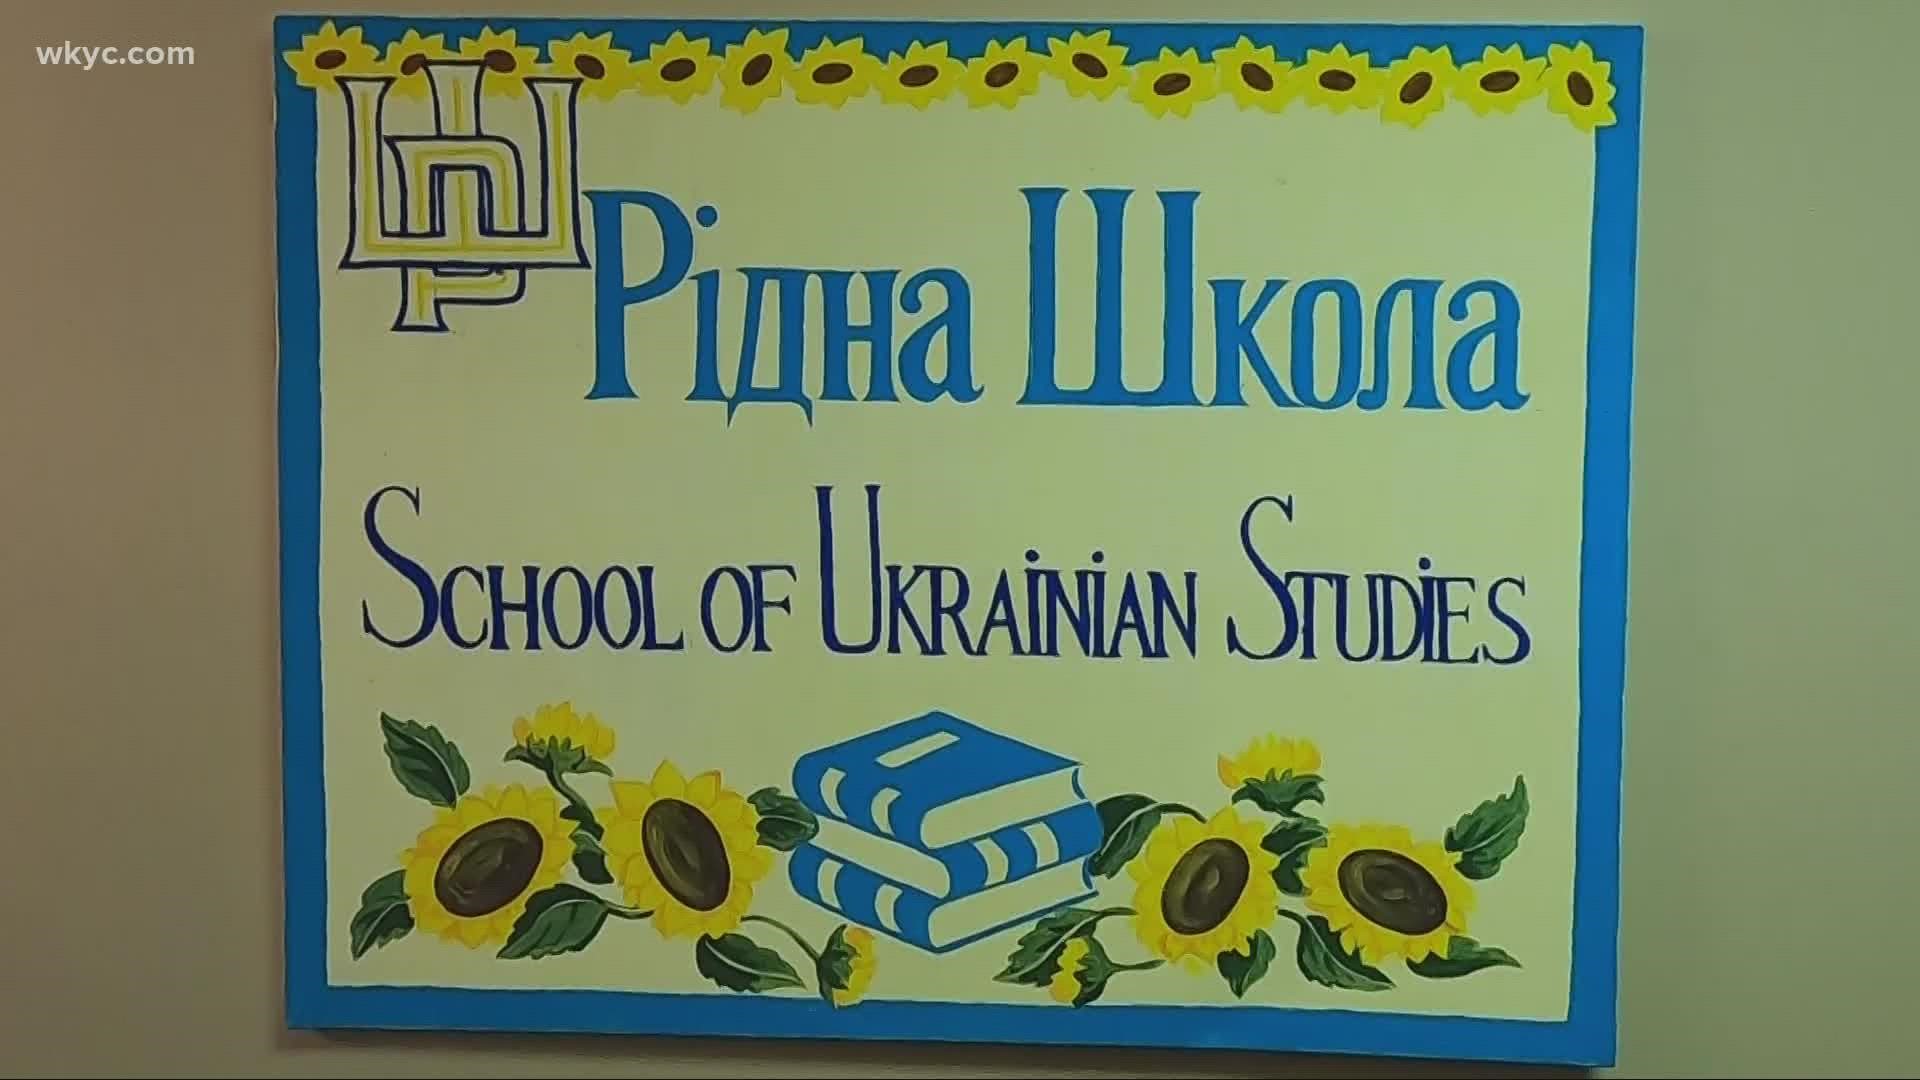 Students young and old at Ridna Shkola, the Cleveland School of Ukrainian Studies, are devastated by what they’re seeing.